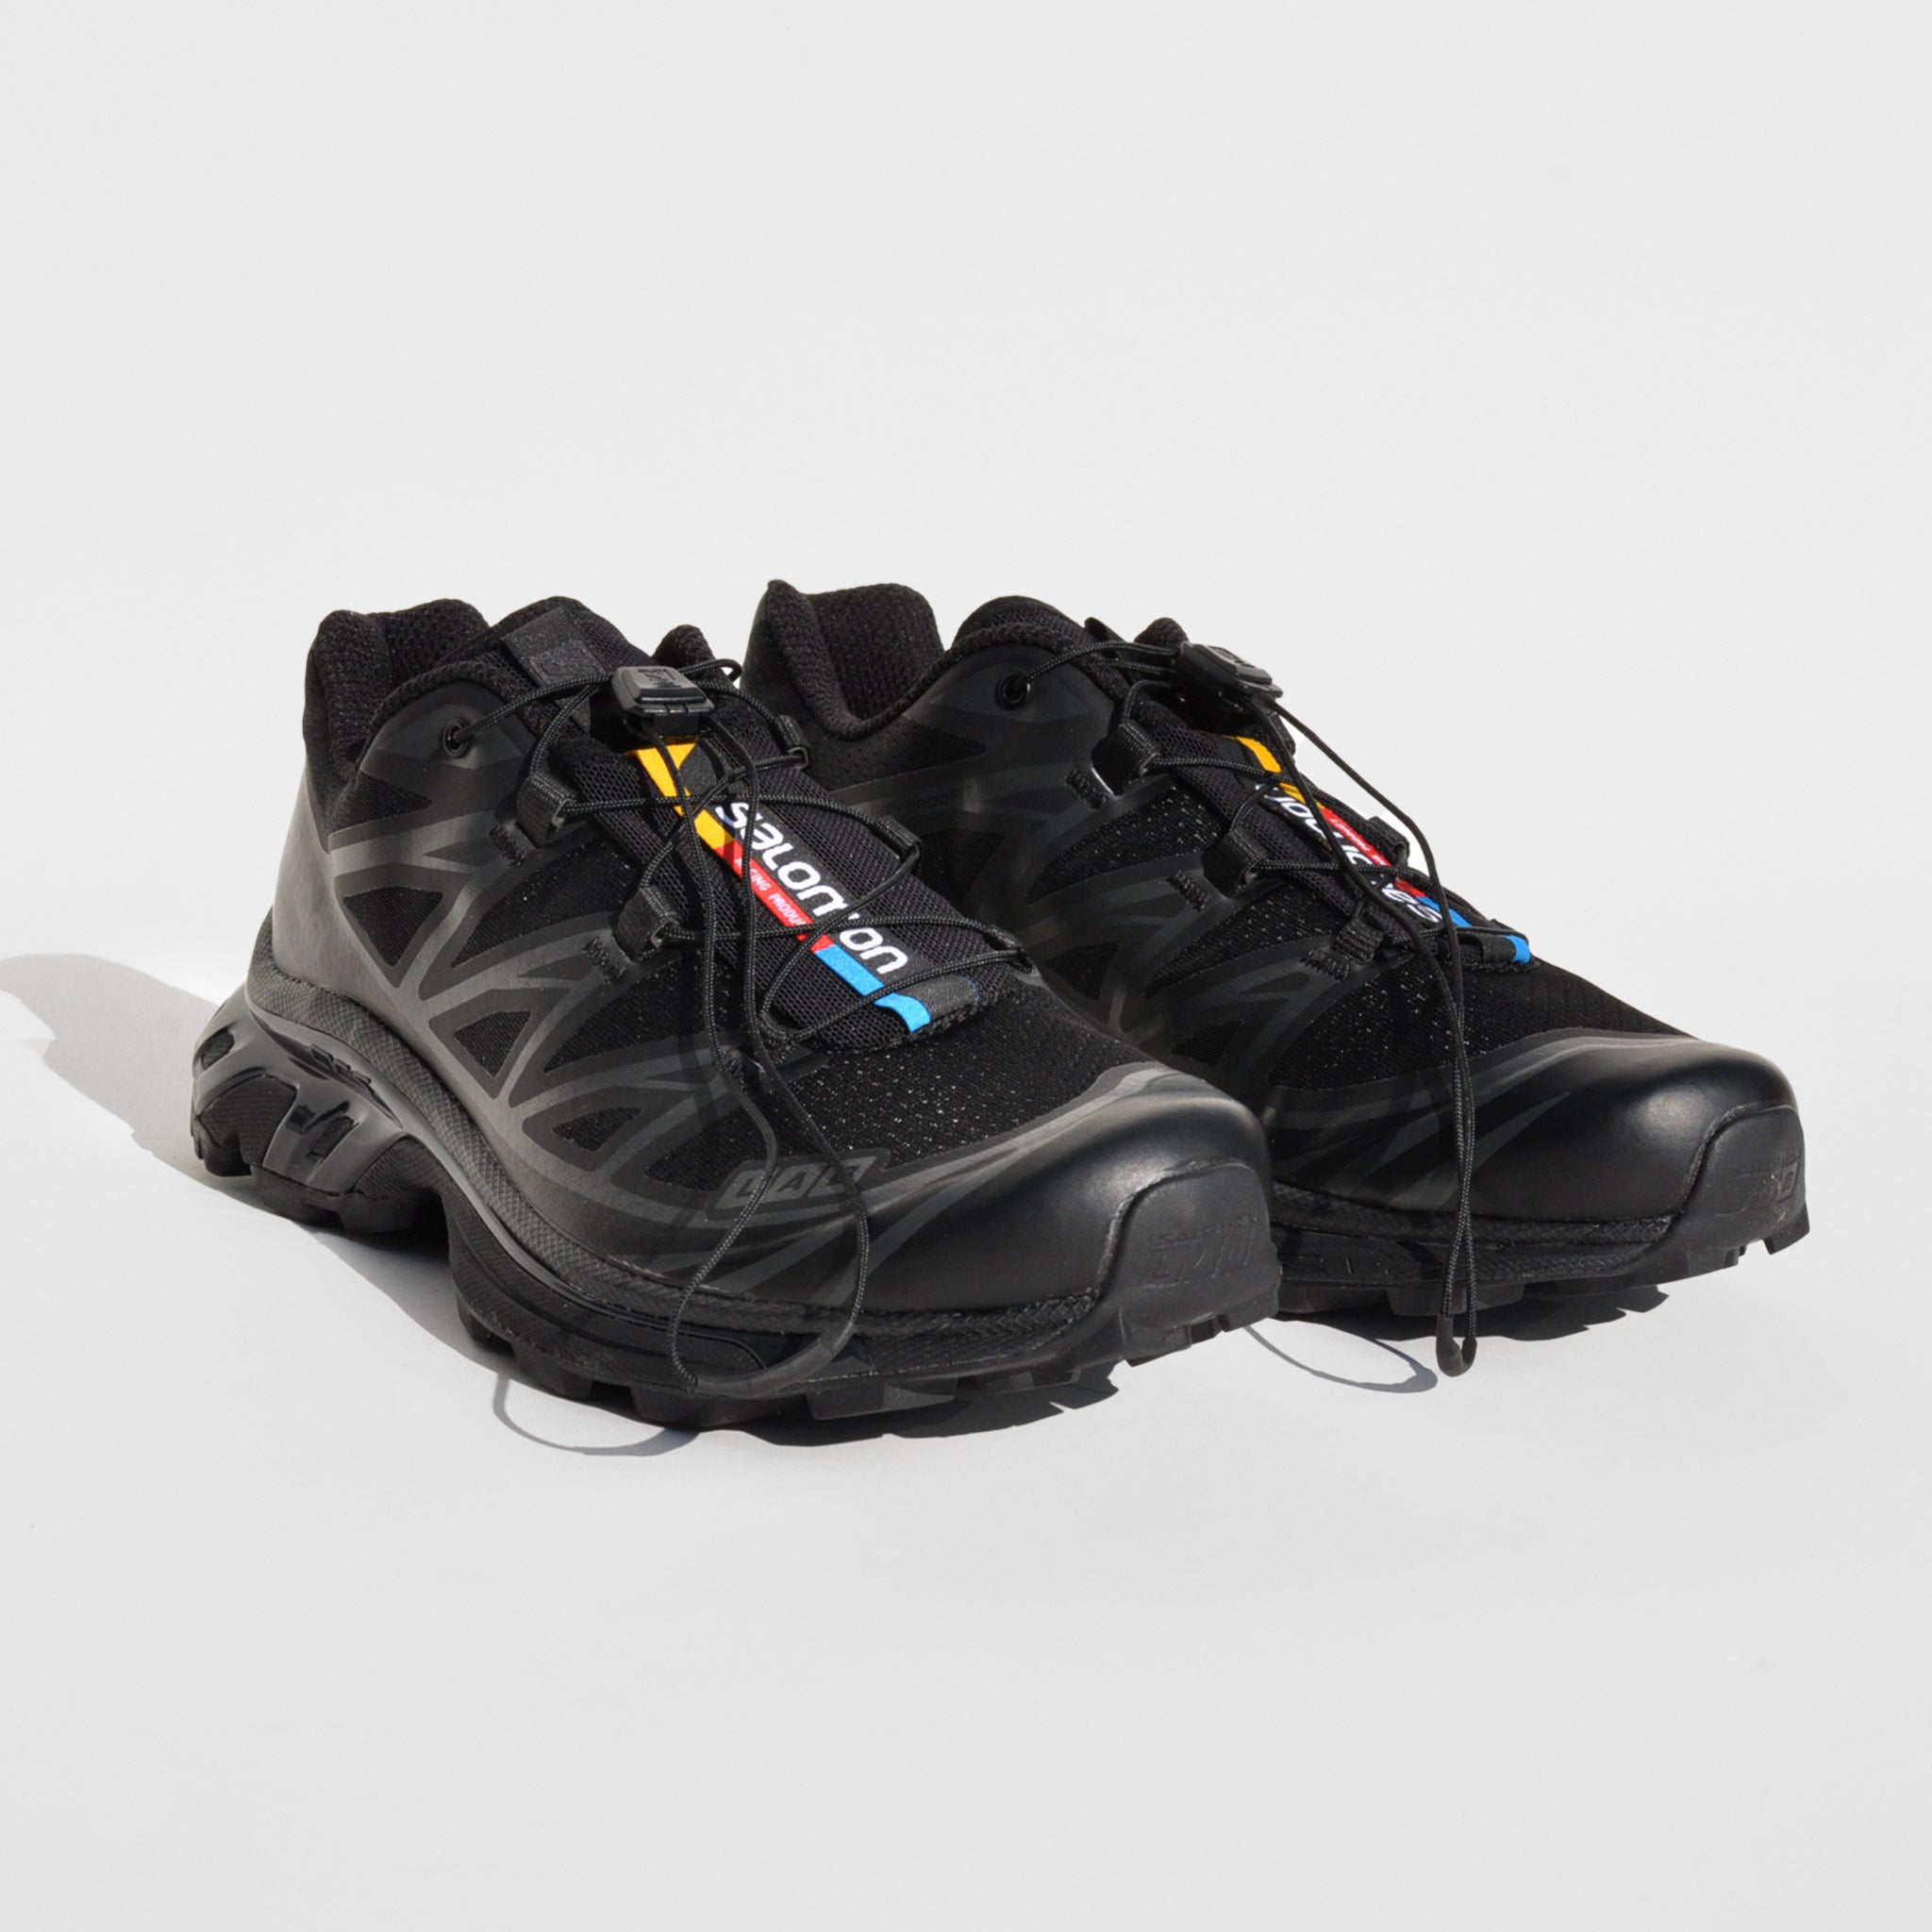 Front image of the XT-6-black sneakers by Salmon sport style in black. These sneakers are black with their rainbow logo down the middle tongue.